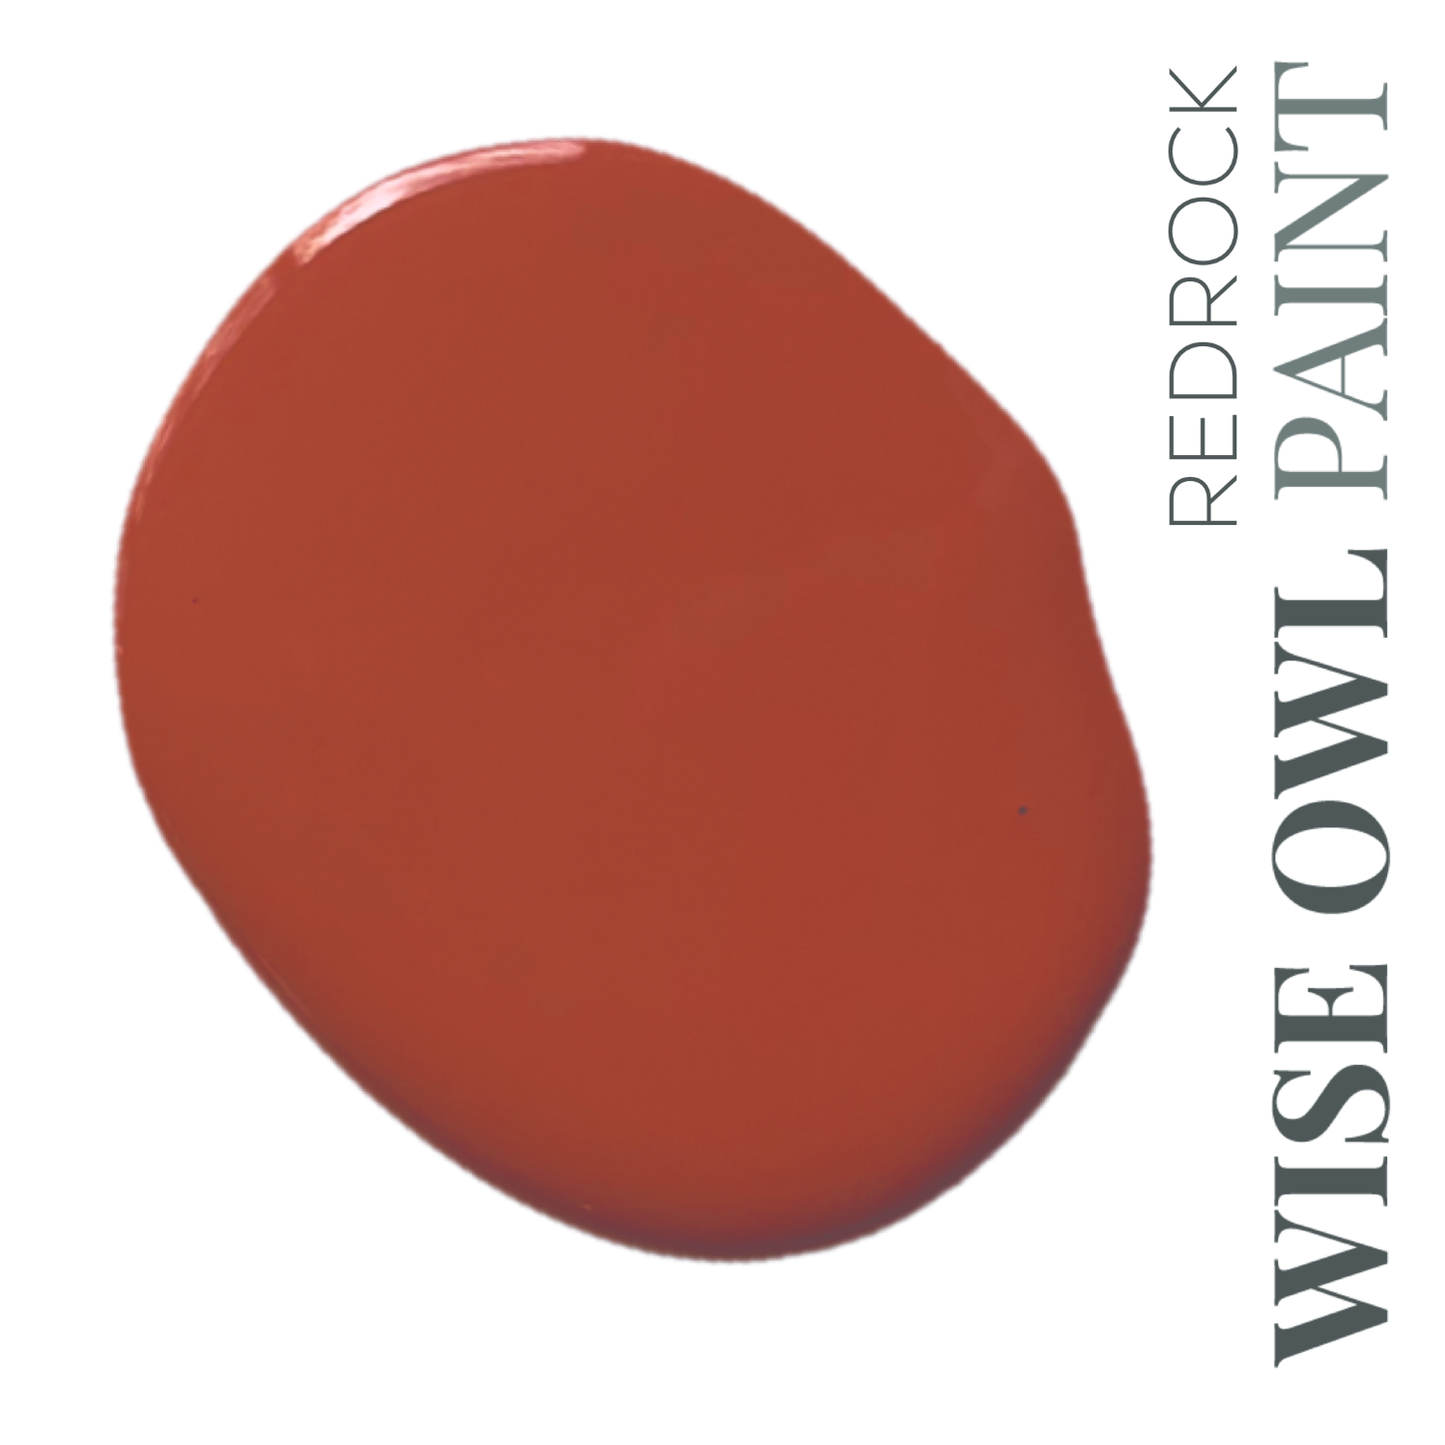 Wise Owl Chalk Synthesis Paint - Red Rock